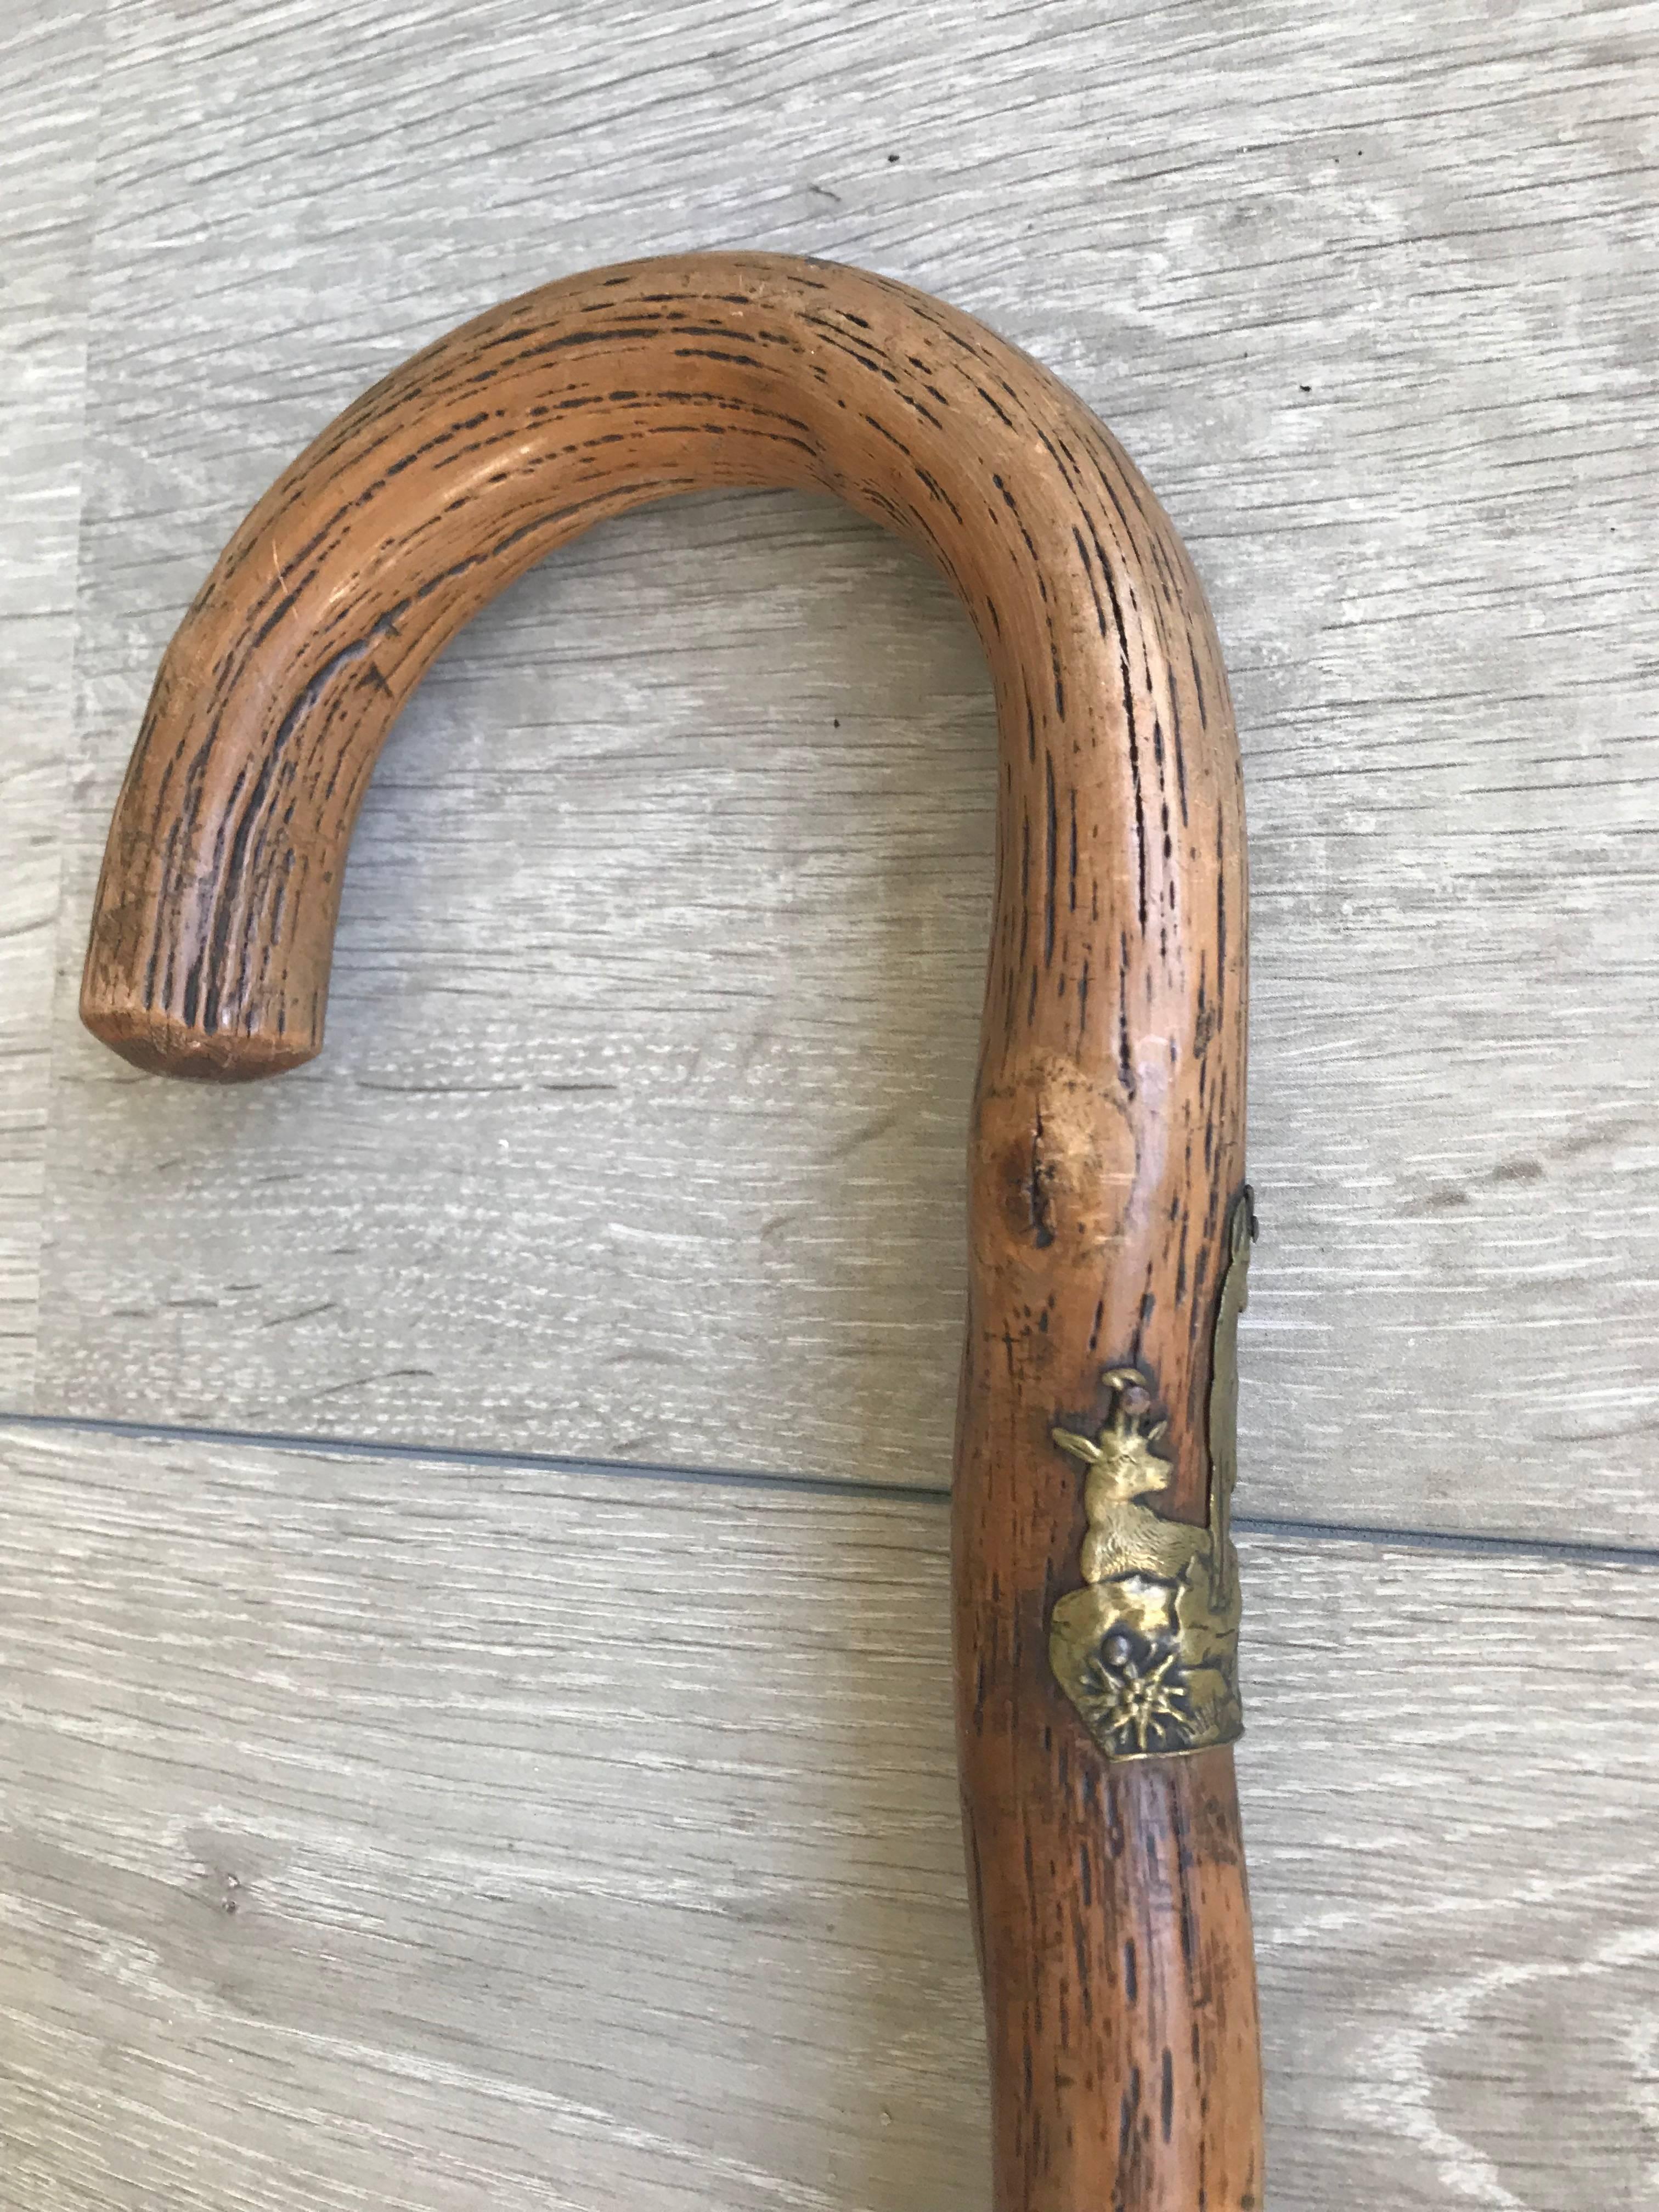 Wonderful look and feel antique walking-stick from circa 1900.

This organic and perfectly natural walking cane with a beautifully bent grip comes with a highly stylish and all-handcrafted brass deer plaque on the upper end of the stem. The look and